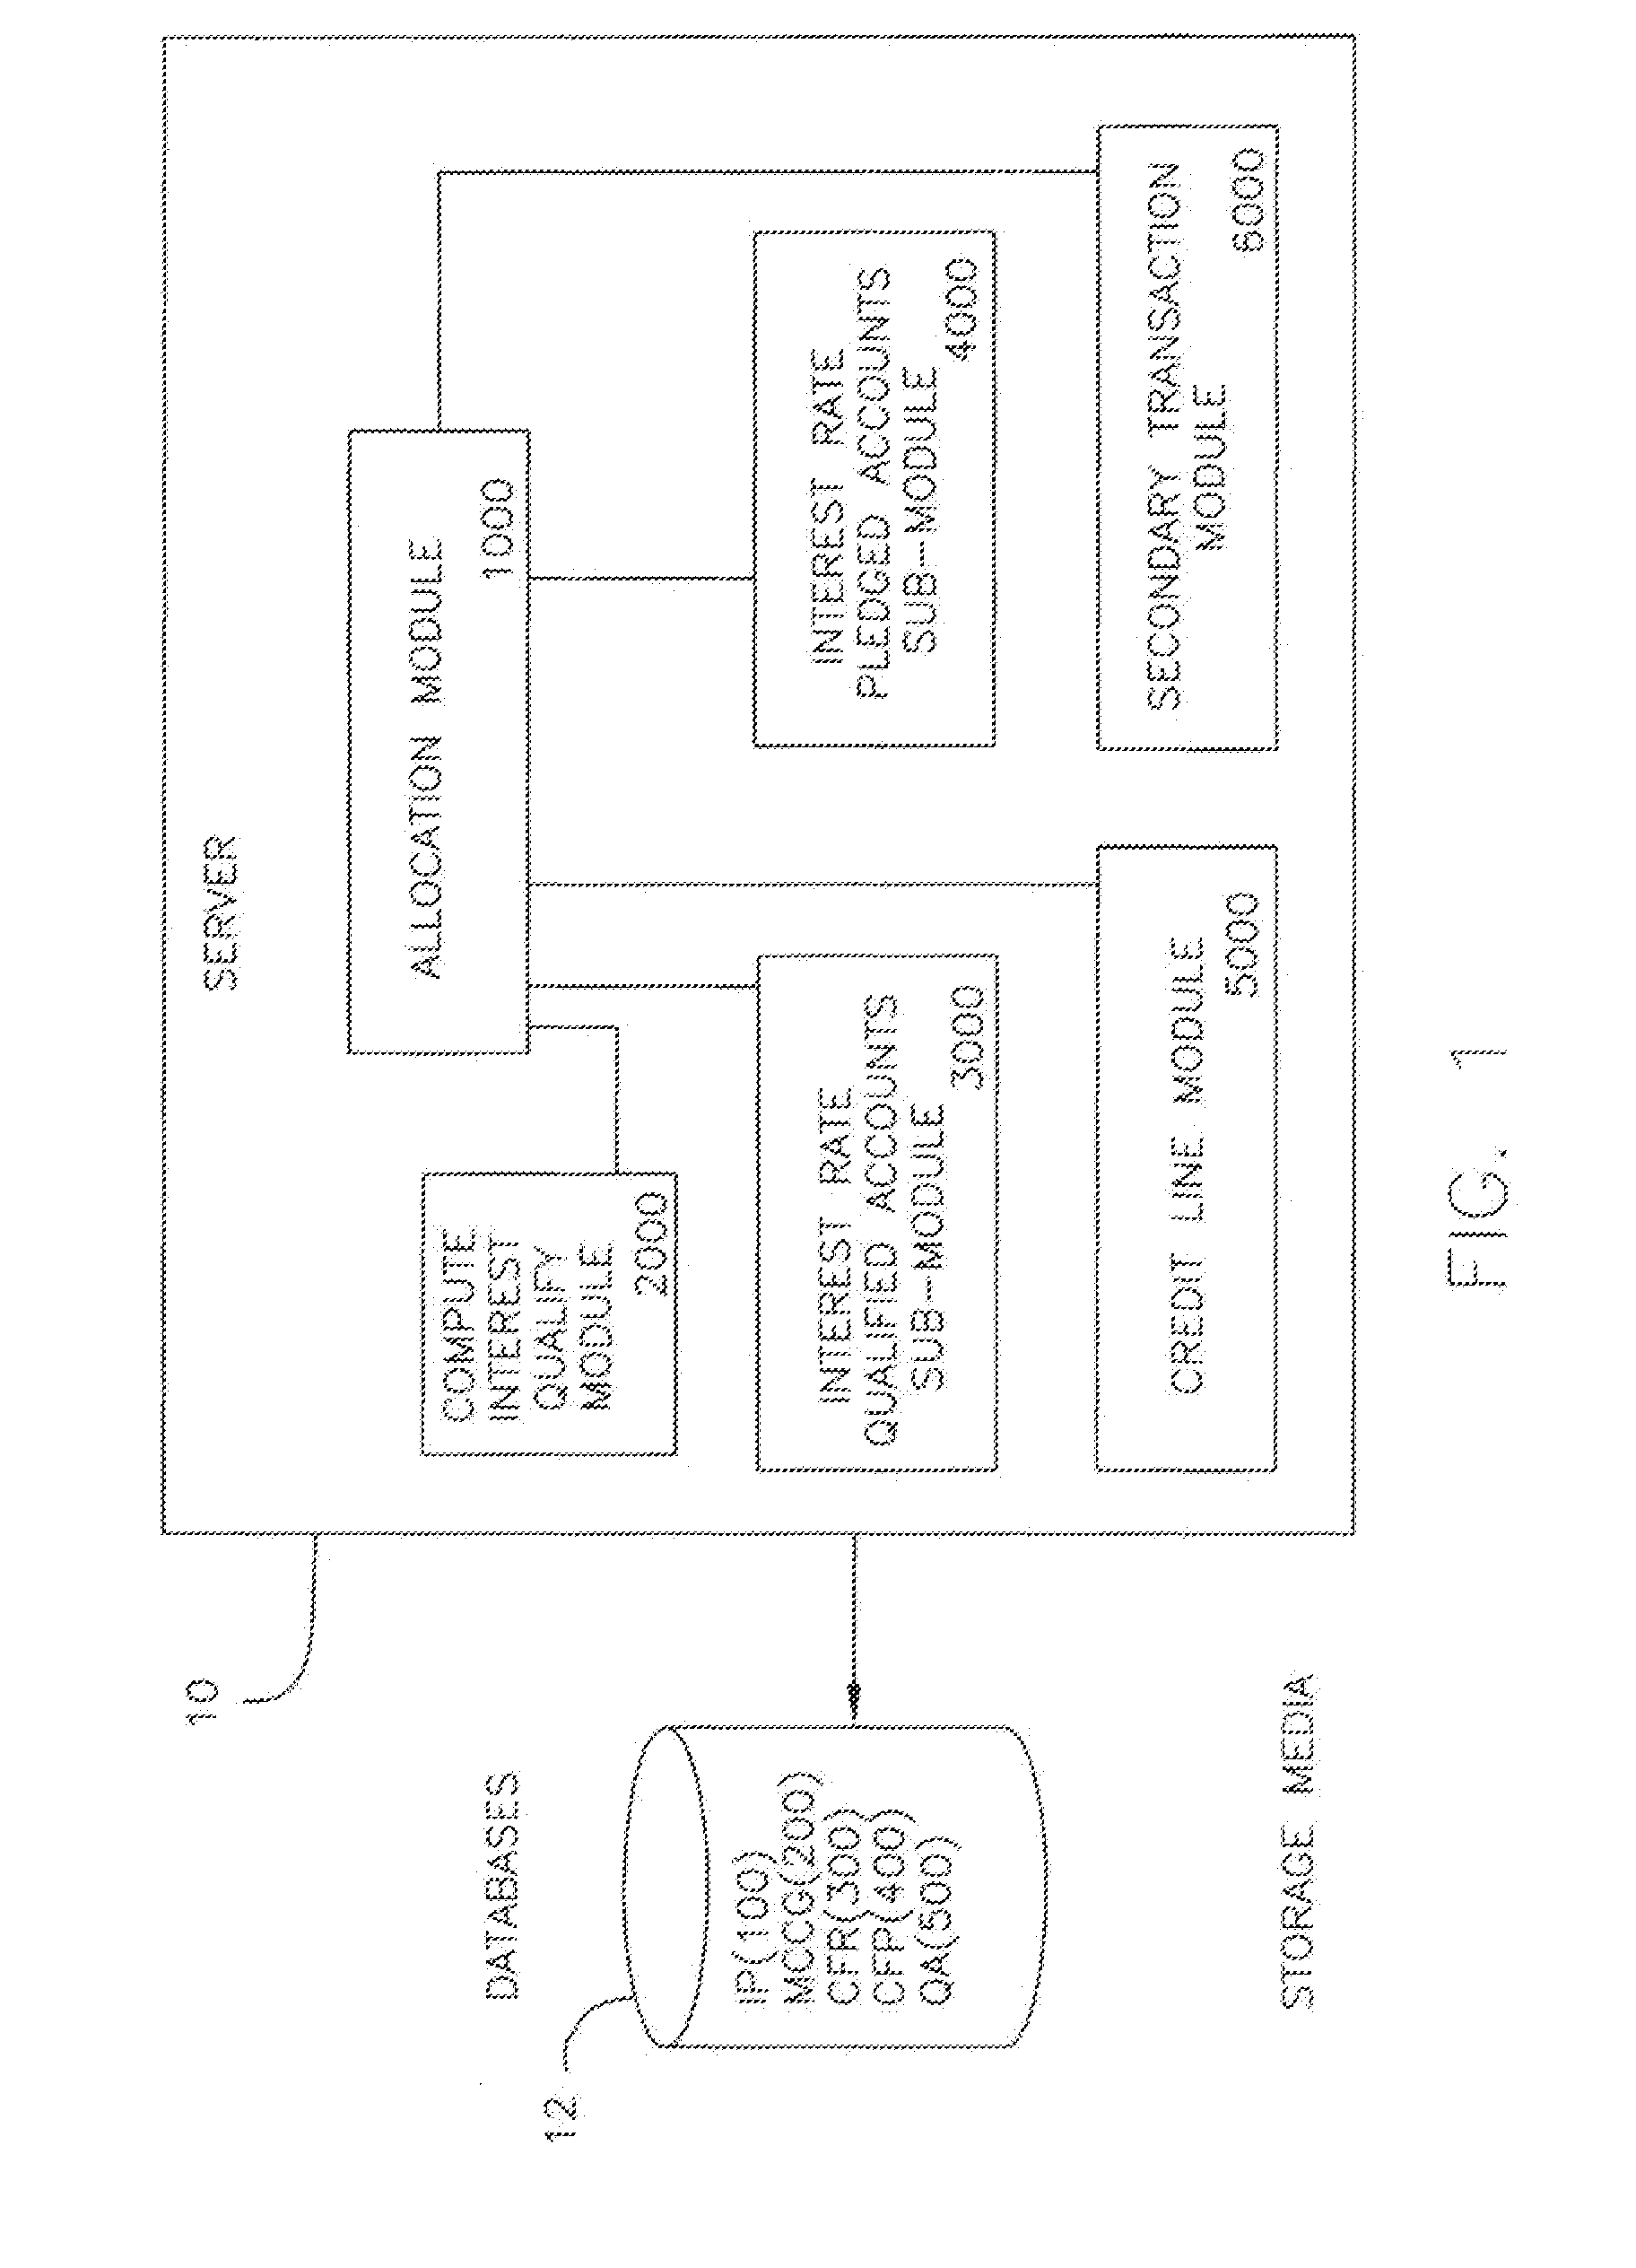 System and method for extracting value for consumers and institutions from depth of relationships